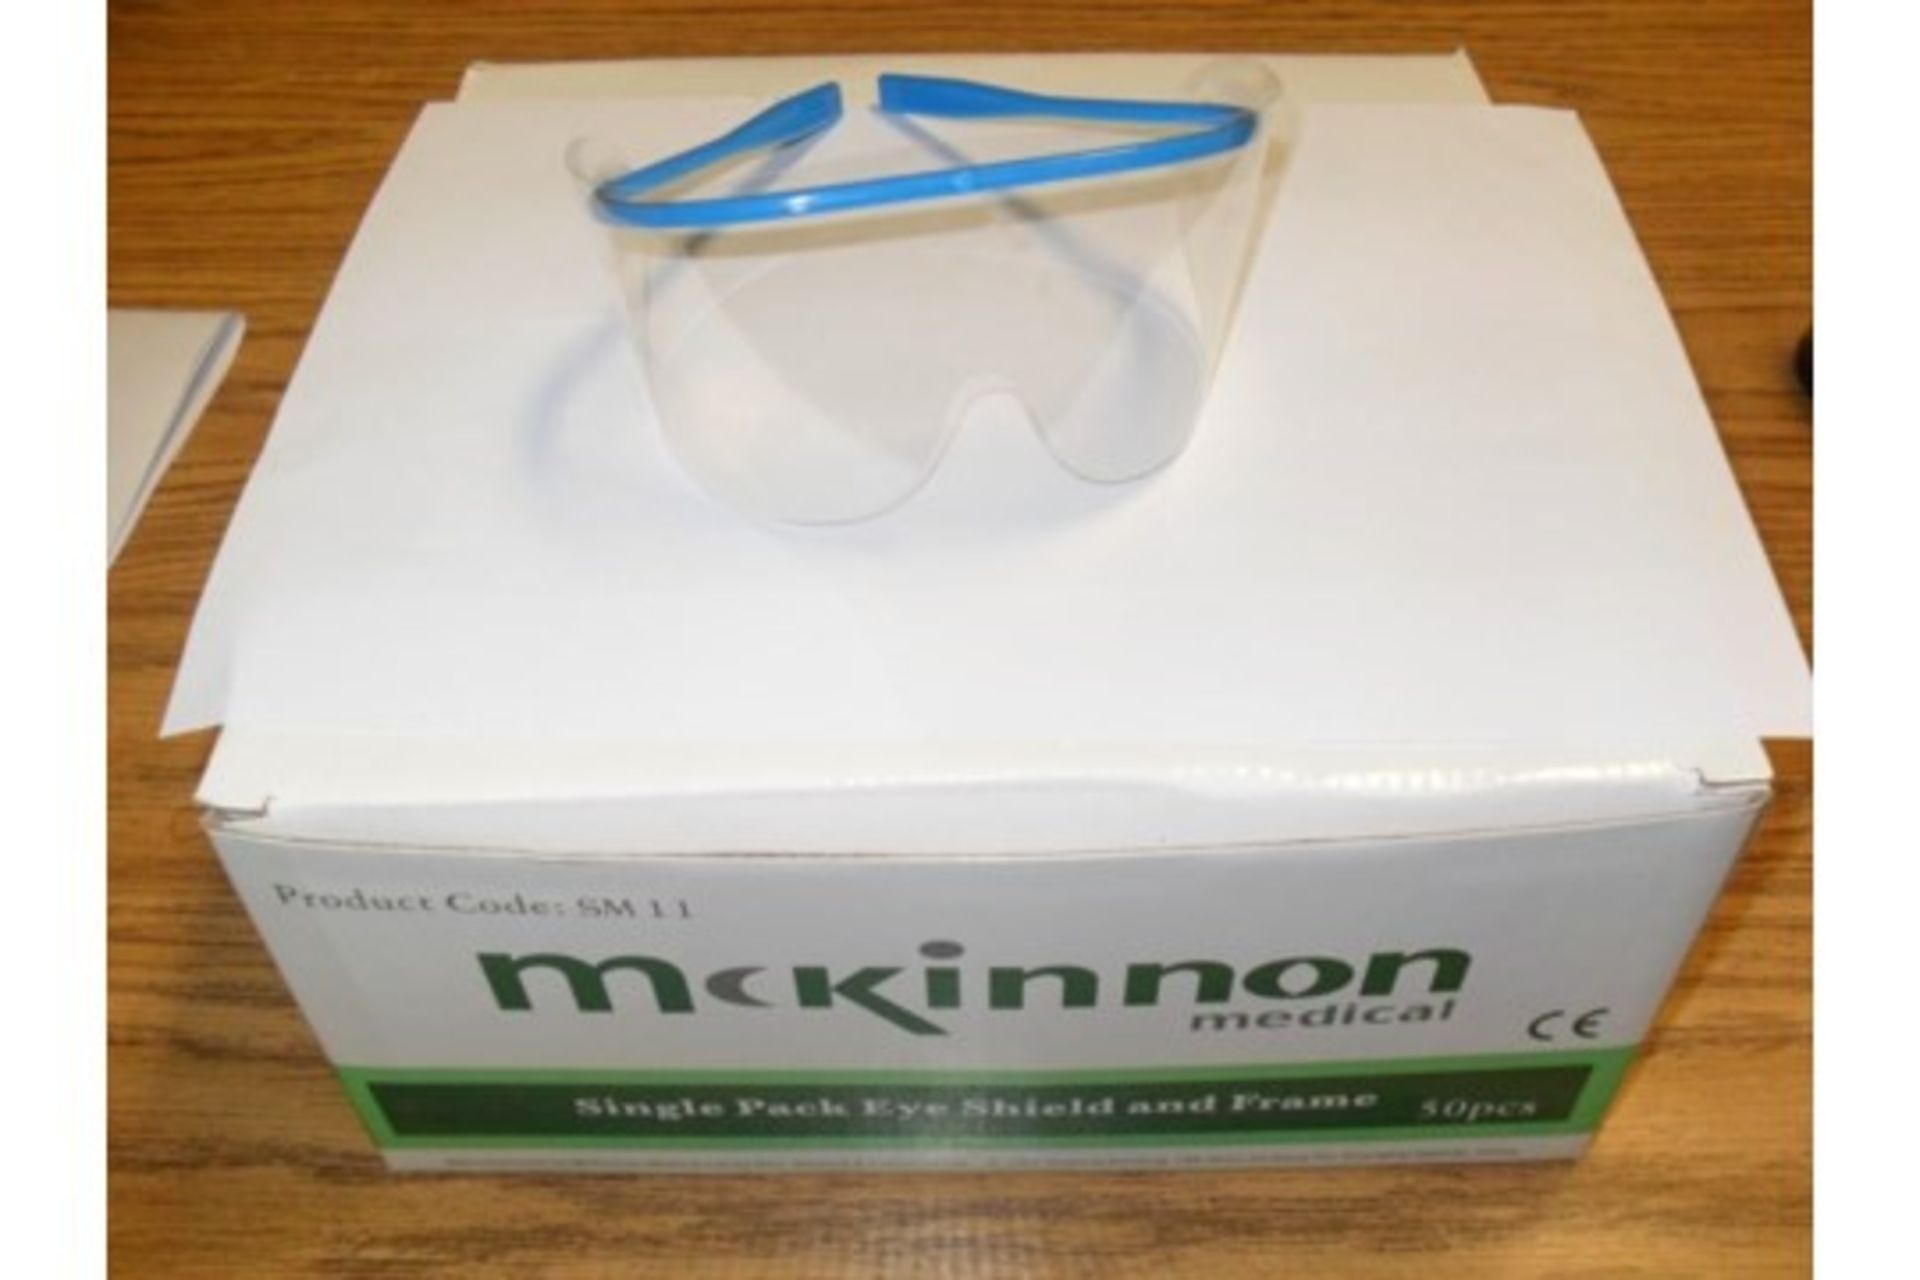 BOX OF 50 X MCKINNON MEDICAL EYE SHIELD AND FRAME (PROTECTIVE DISPOSABLE GLASSES)